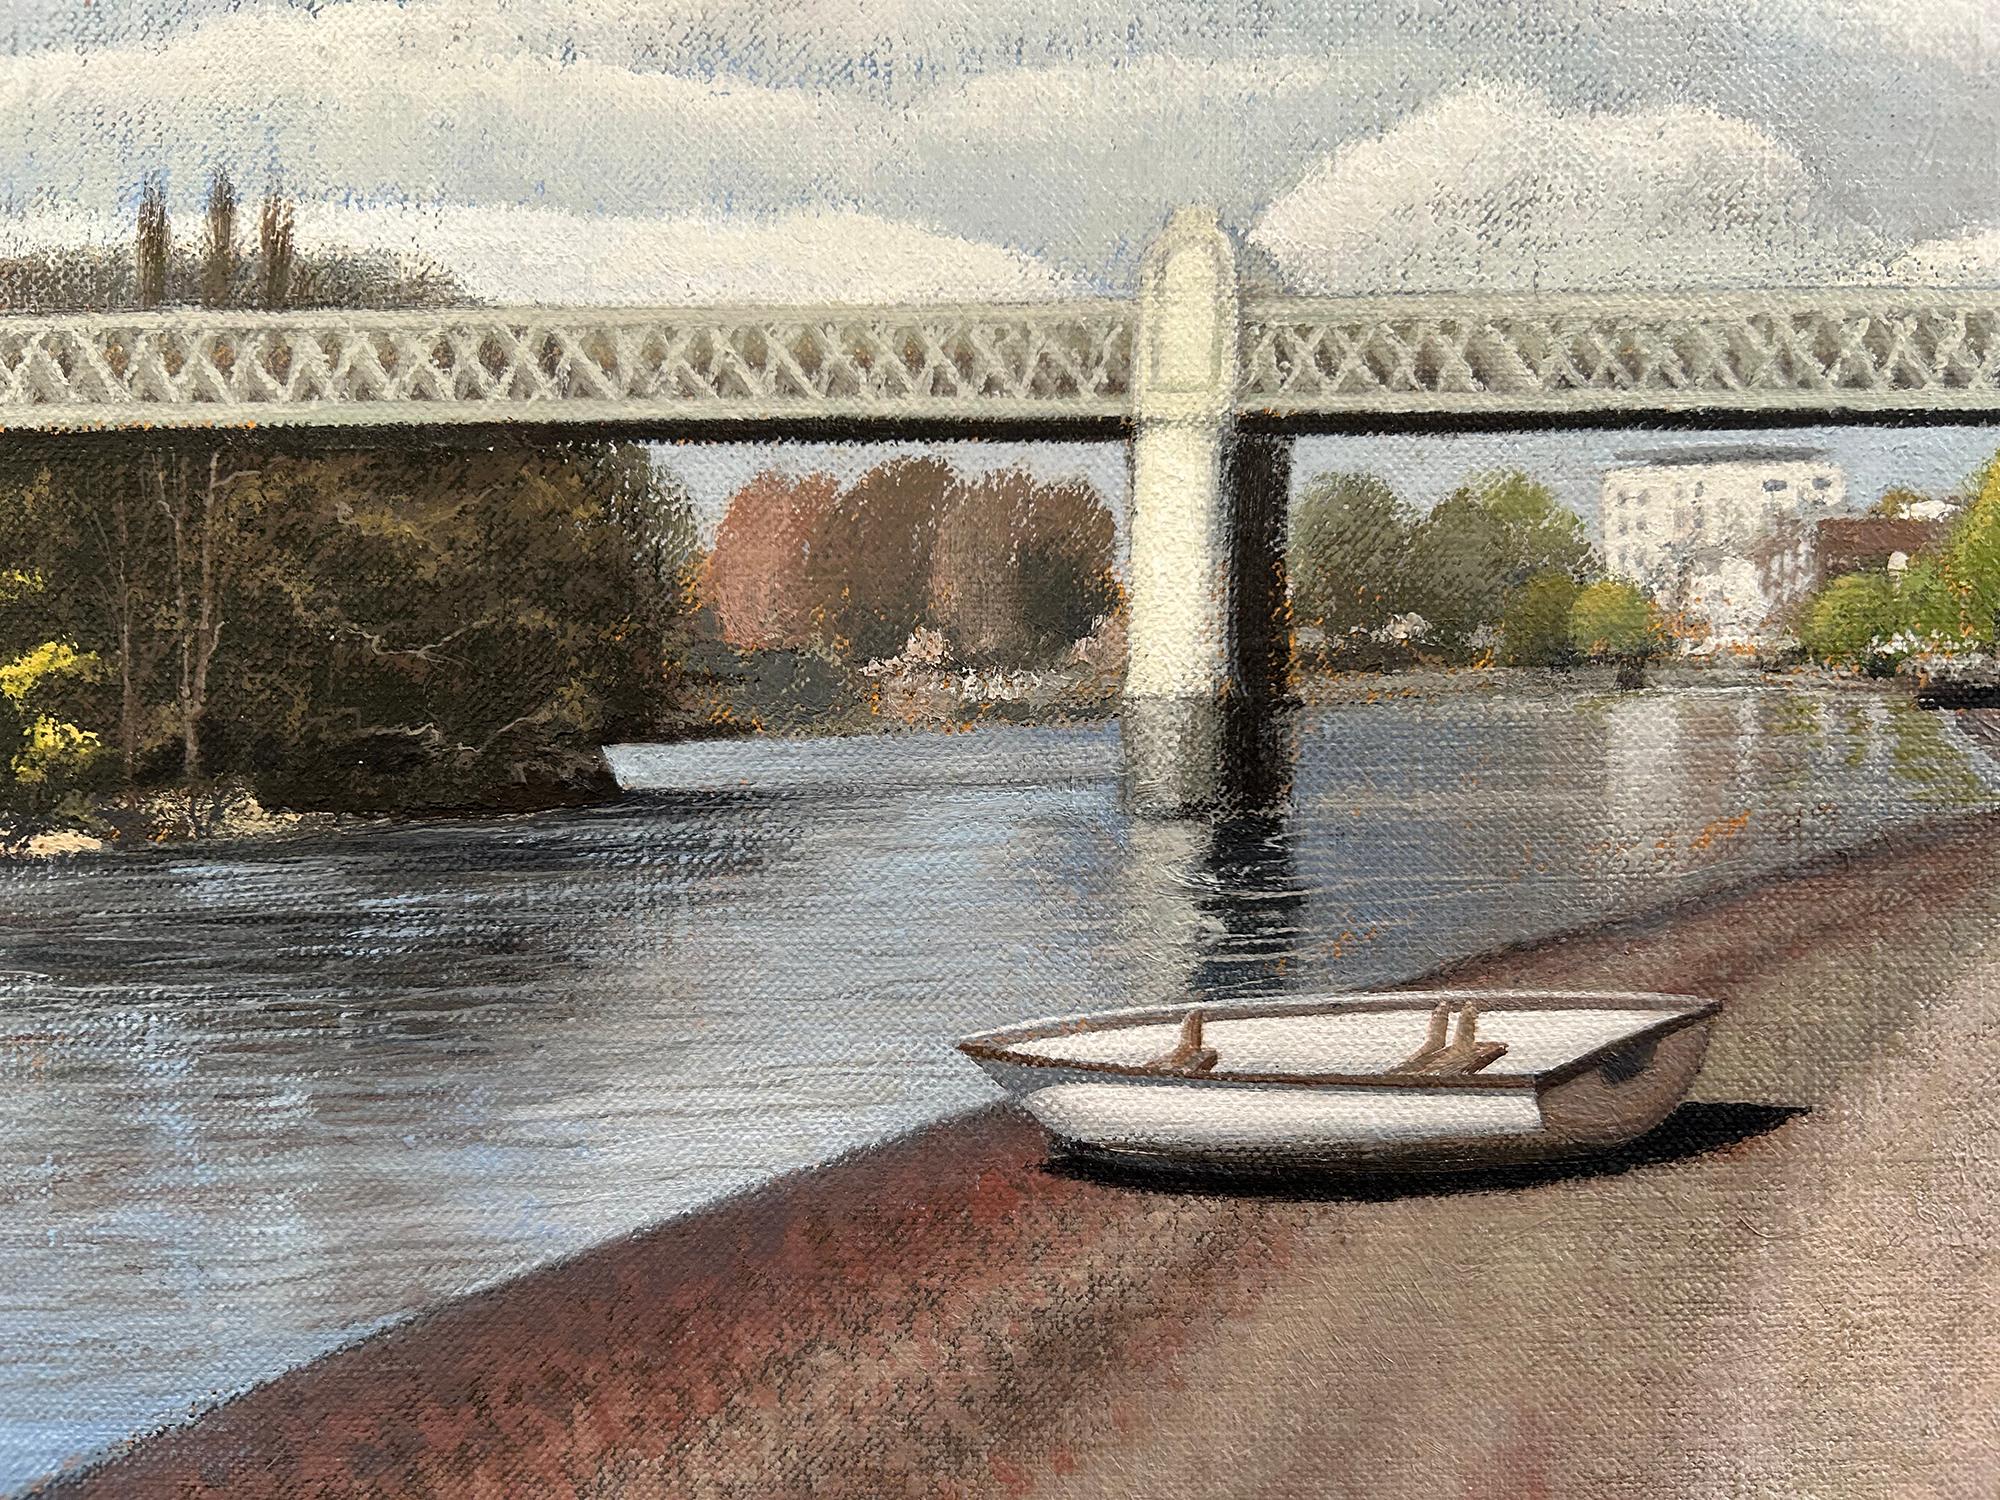 A view of Strand-on-the-Green in Chiswick with Kew railway bridge in the foreground. Low tide in mid April.

Additional information:
Oil on Canvas
79 H x 48.5 W x 3 D cm (31.10 x 19.09 x 1.18 in)
Sold framed
Image size: 
Height: 45.5cm (17.91 in)